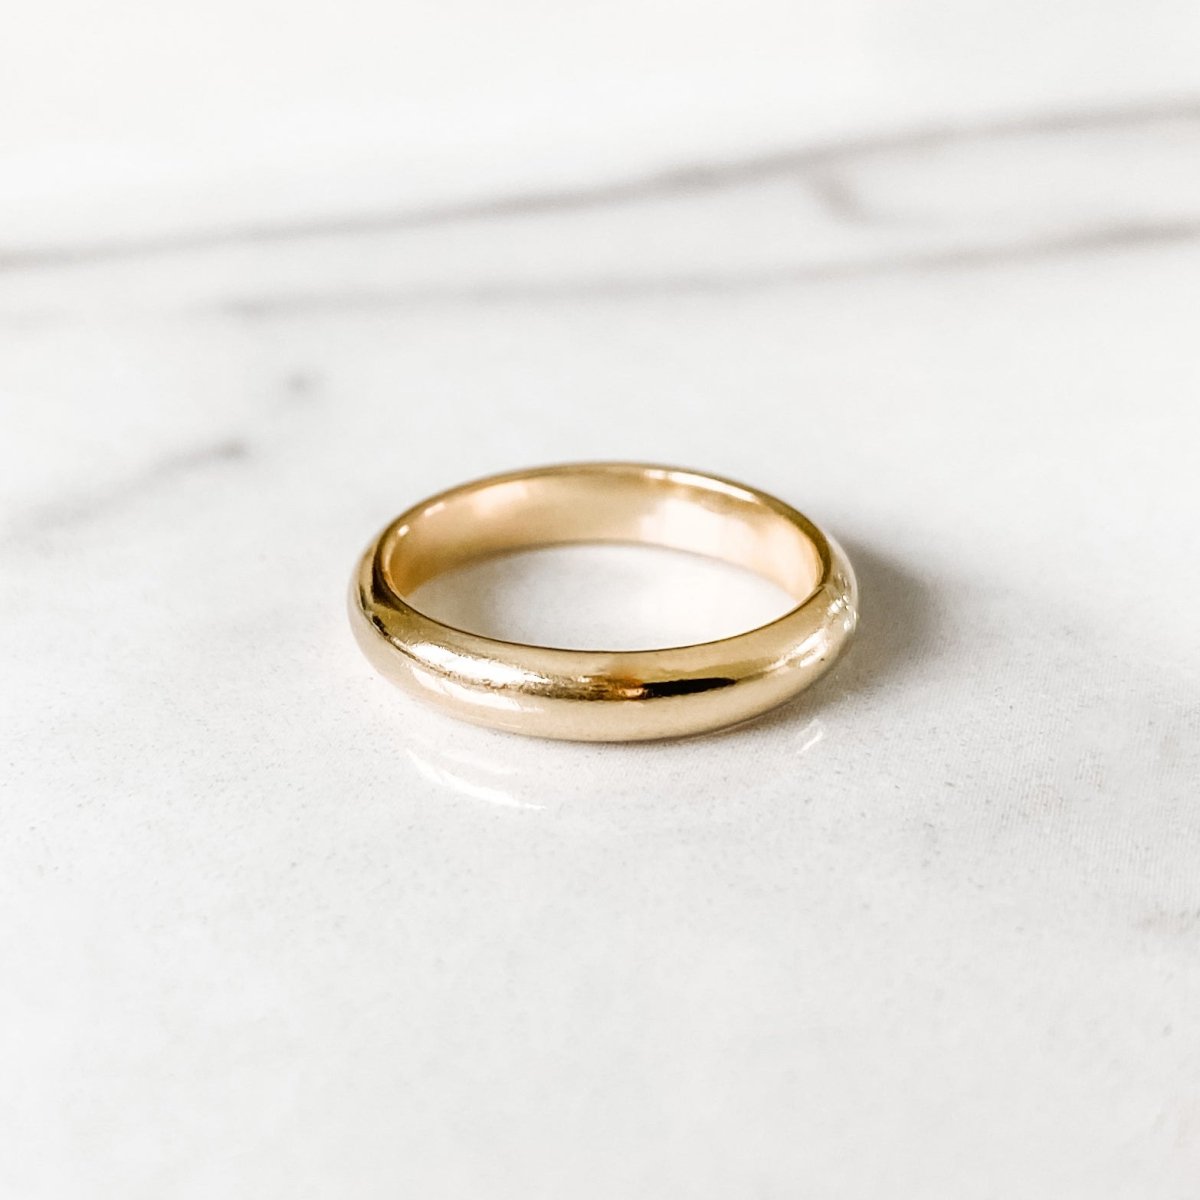 Glam Thick Stacking Ring - Everlove Jewelry Co.